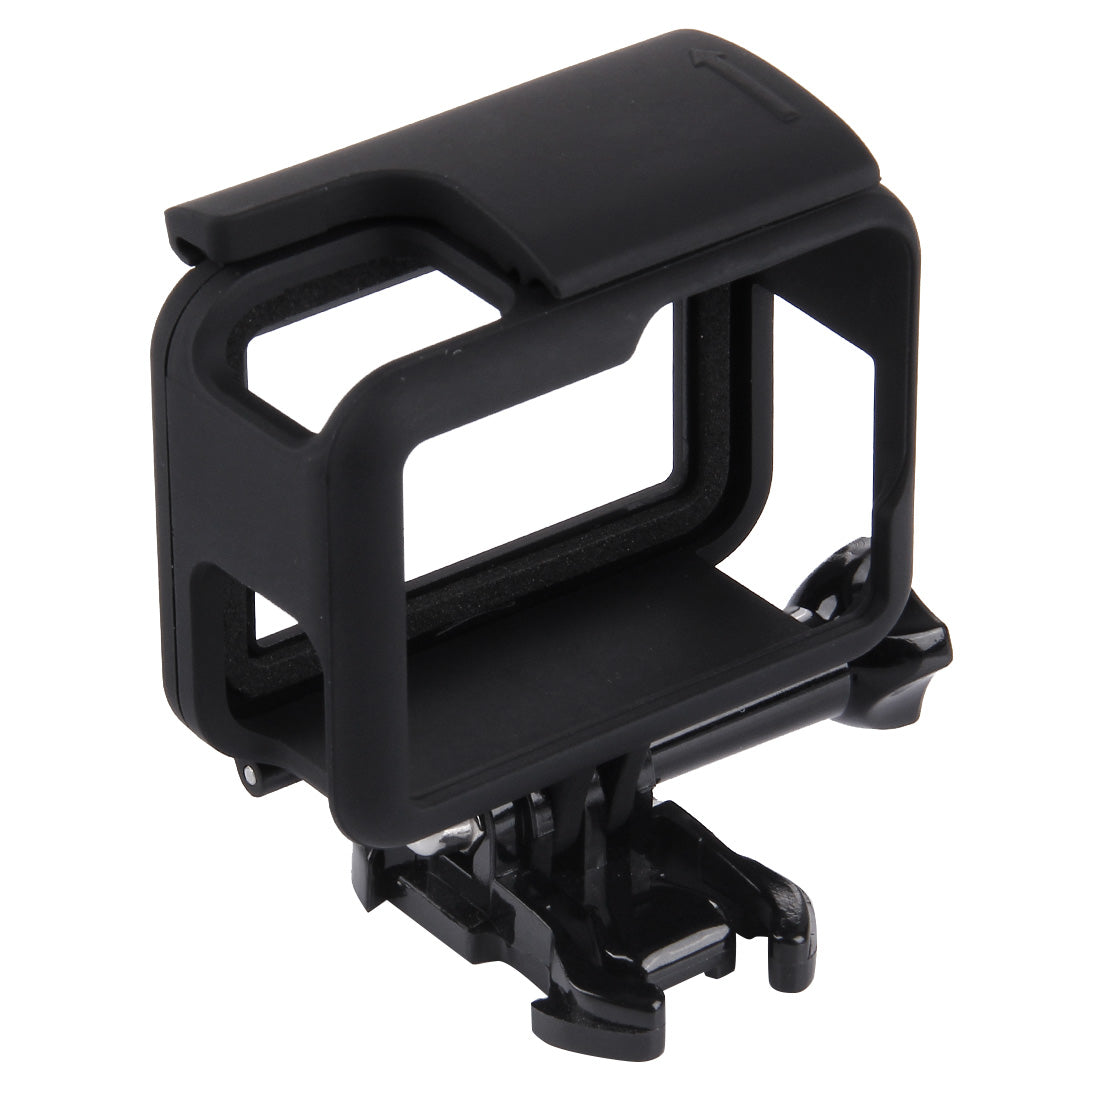 Puluz PU187 Plastic Housing Shell Frame Mount Protective Case Cage for GoPro Hero 7 Black / 6 / 5